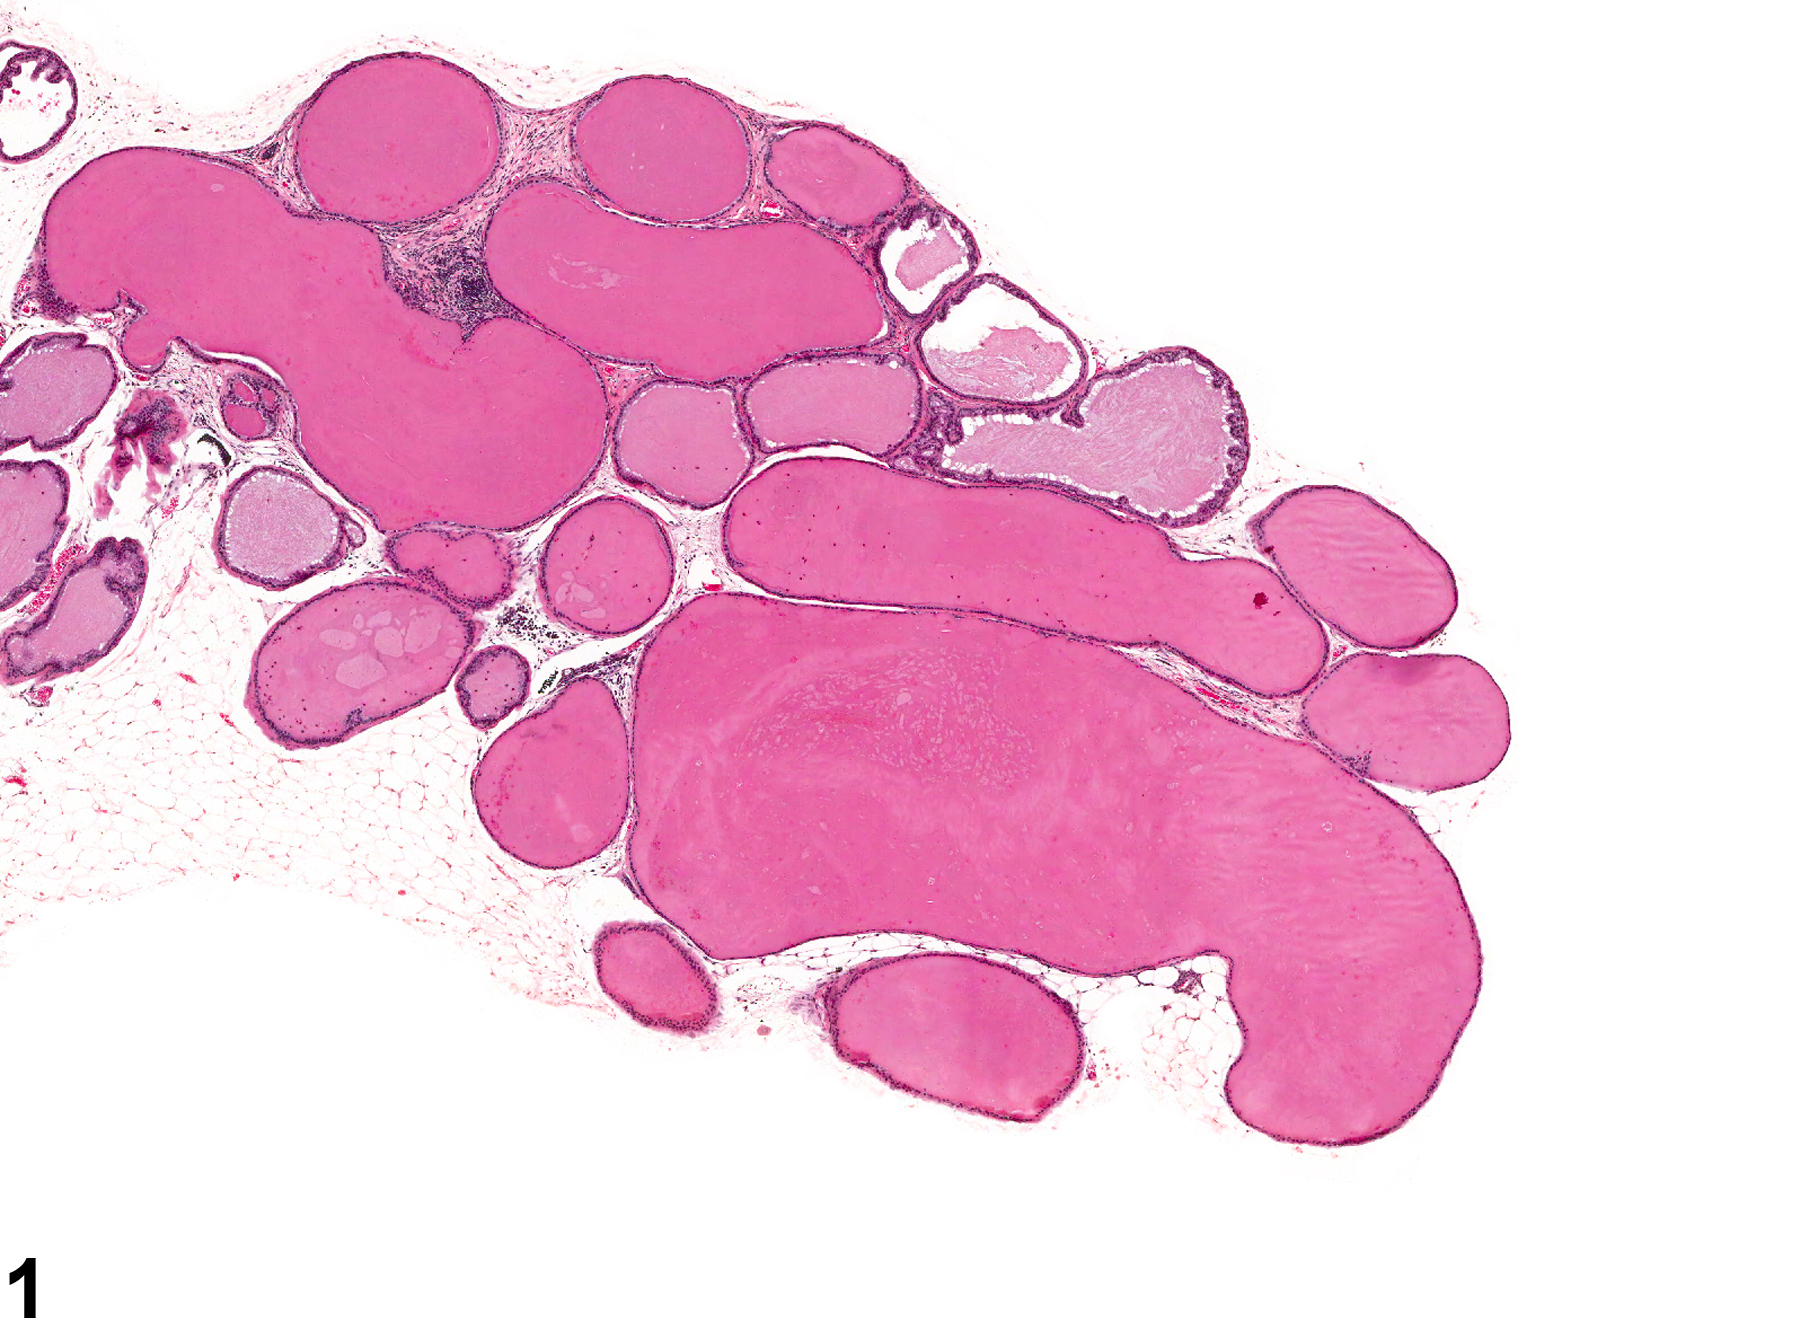 Image of dilation, acinar in the coagulating gland from a male B6C3F1 mouse in a chronic study